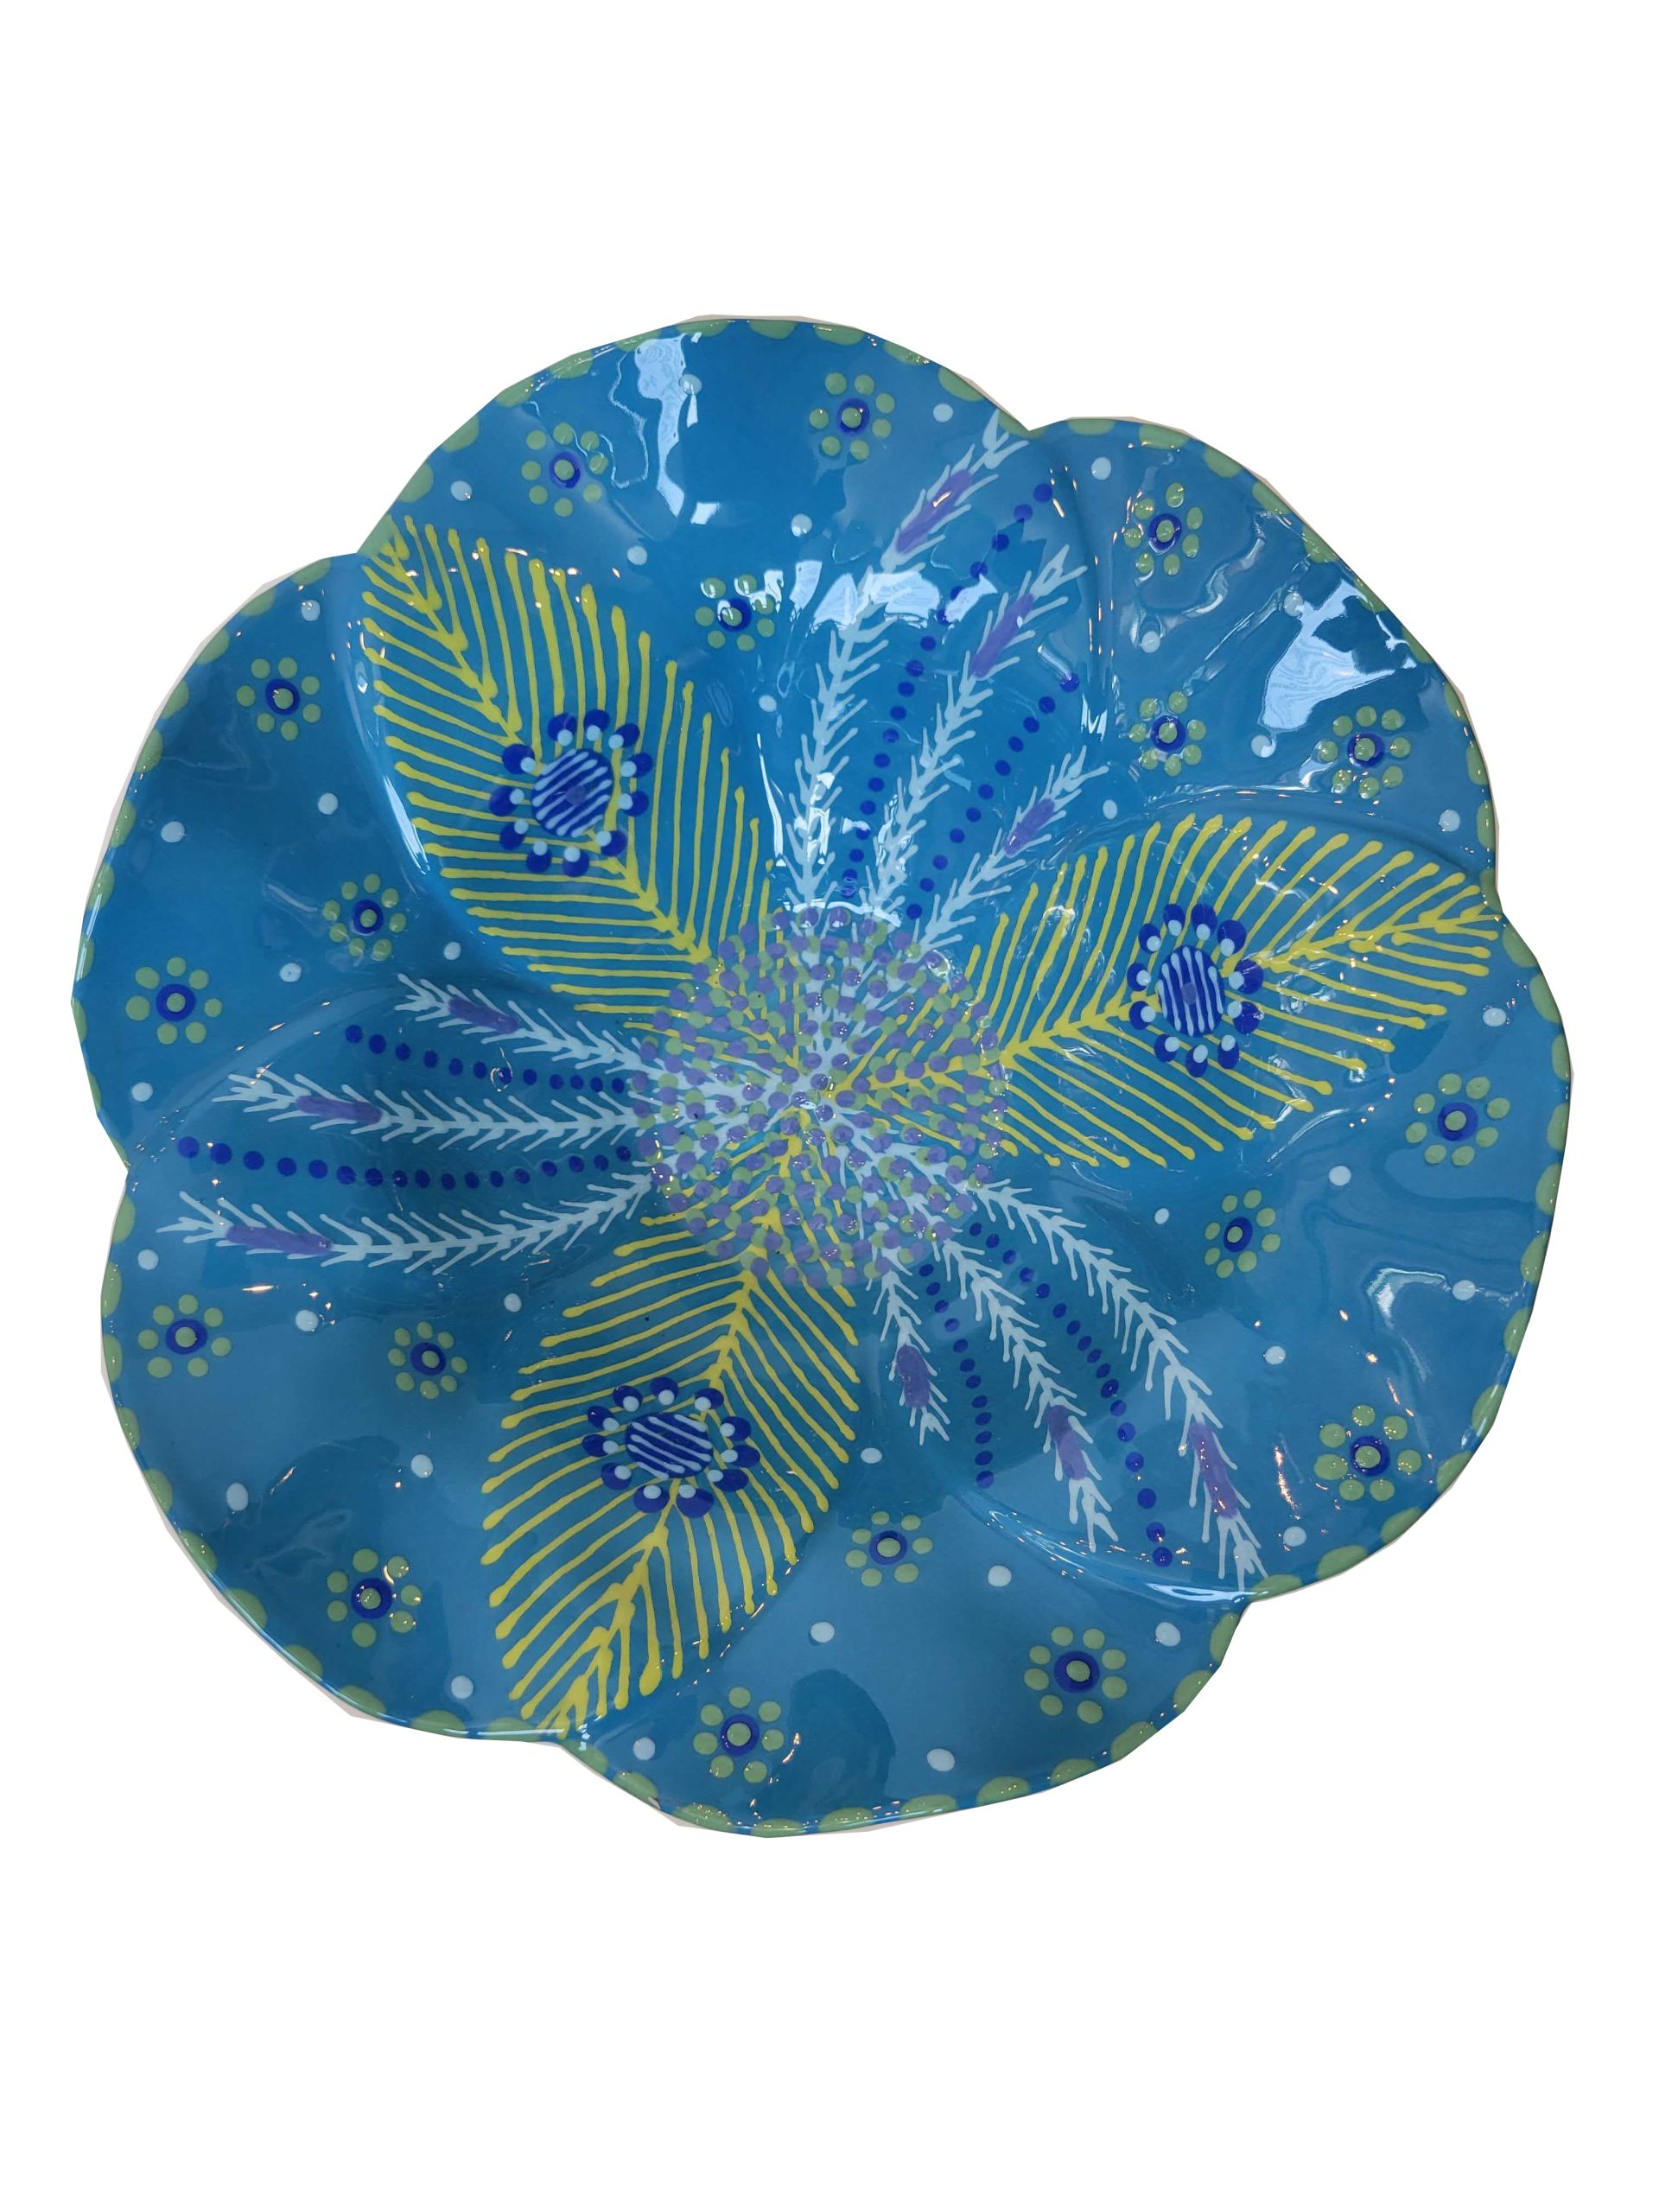 Large African Bowl- Blue